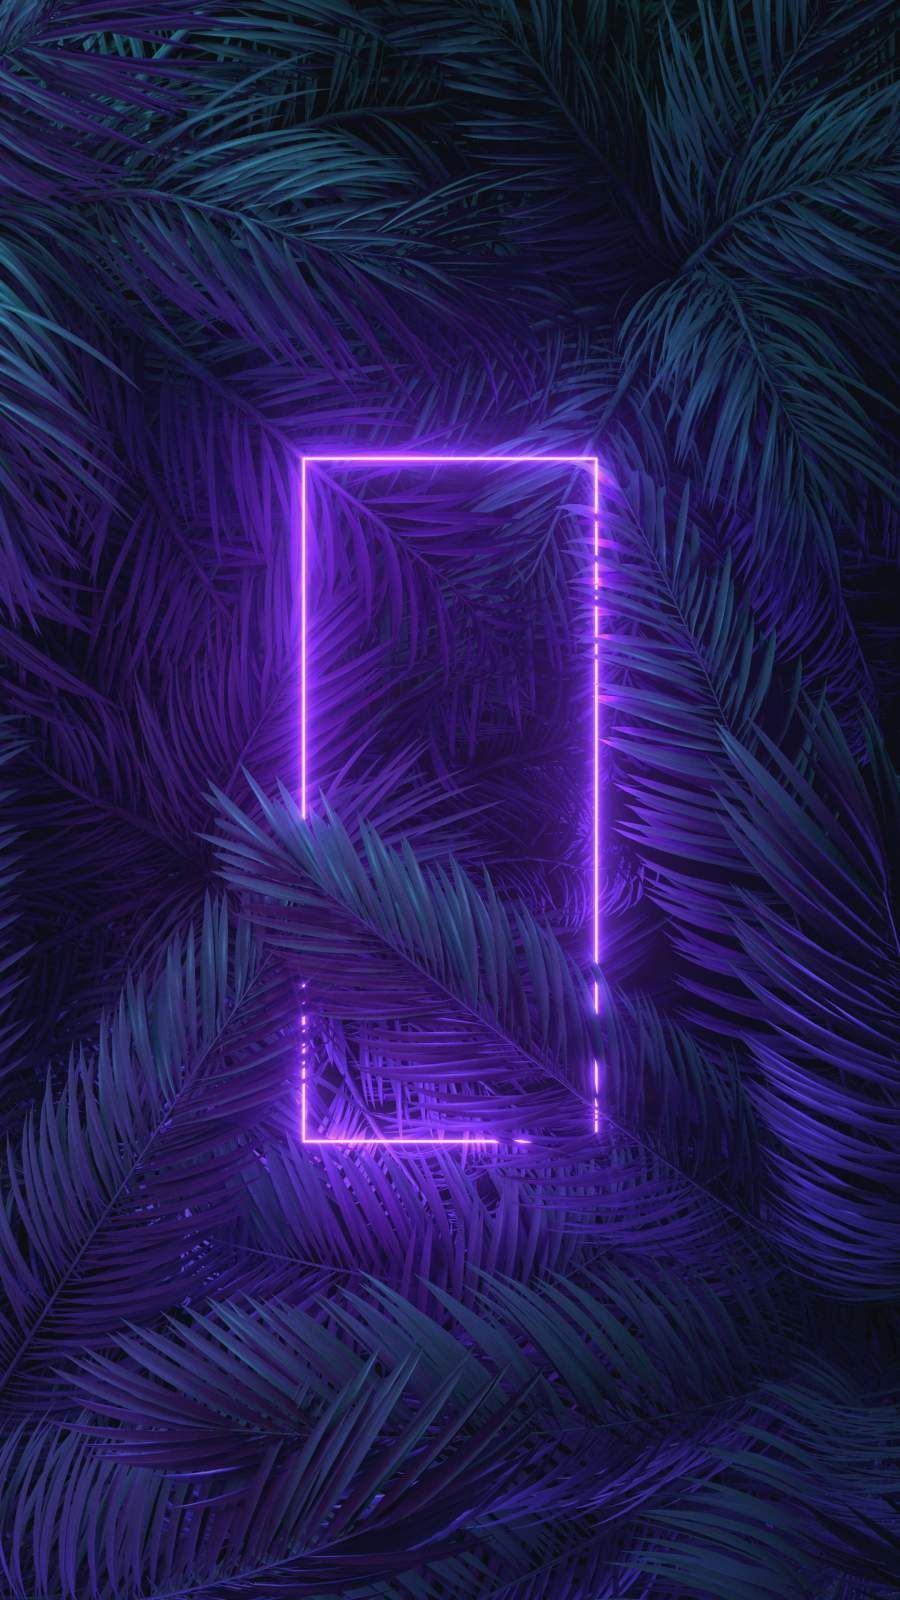 iPhone Wallpaper for iPhone iPhone iPhone X, iPhone XR, iPhone 8 Plus High Quality Wallpap. Wallpaper iphone neon, Neon light wallpaper, Glitch wallpaper